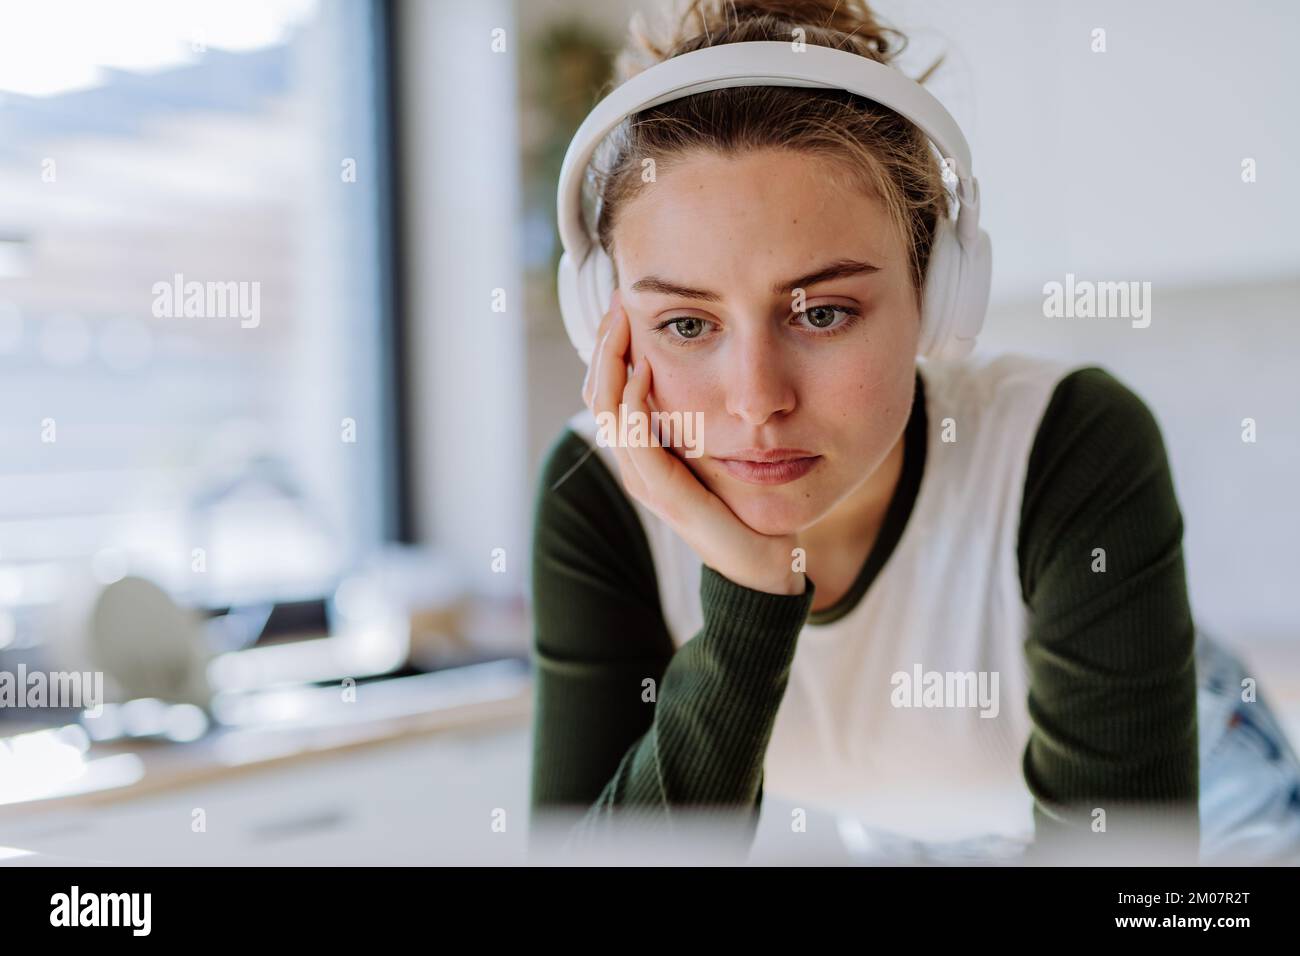 Portrait of young woman having homeoffice in her kitchen. Stock Photo